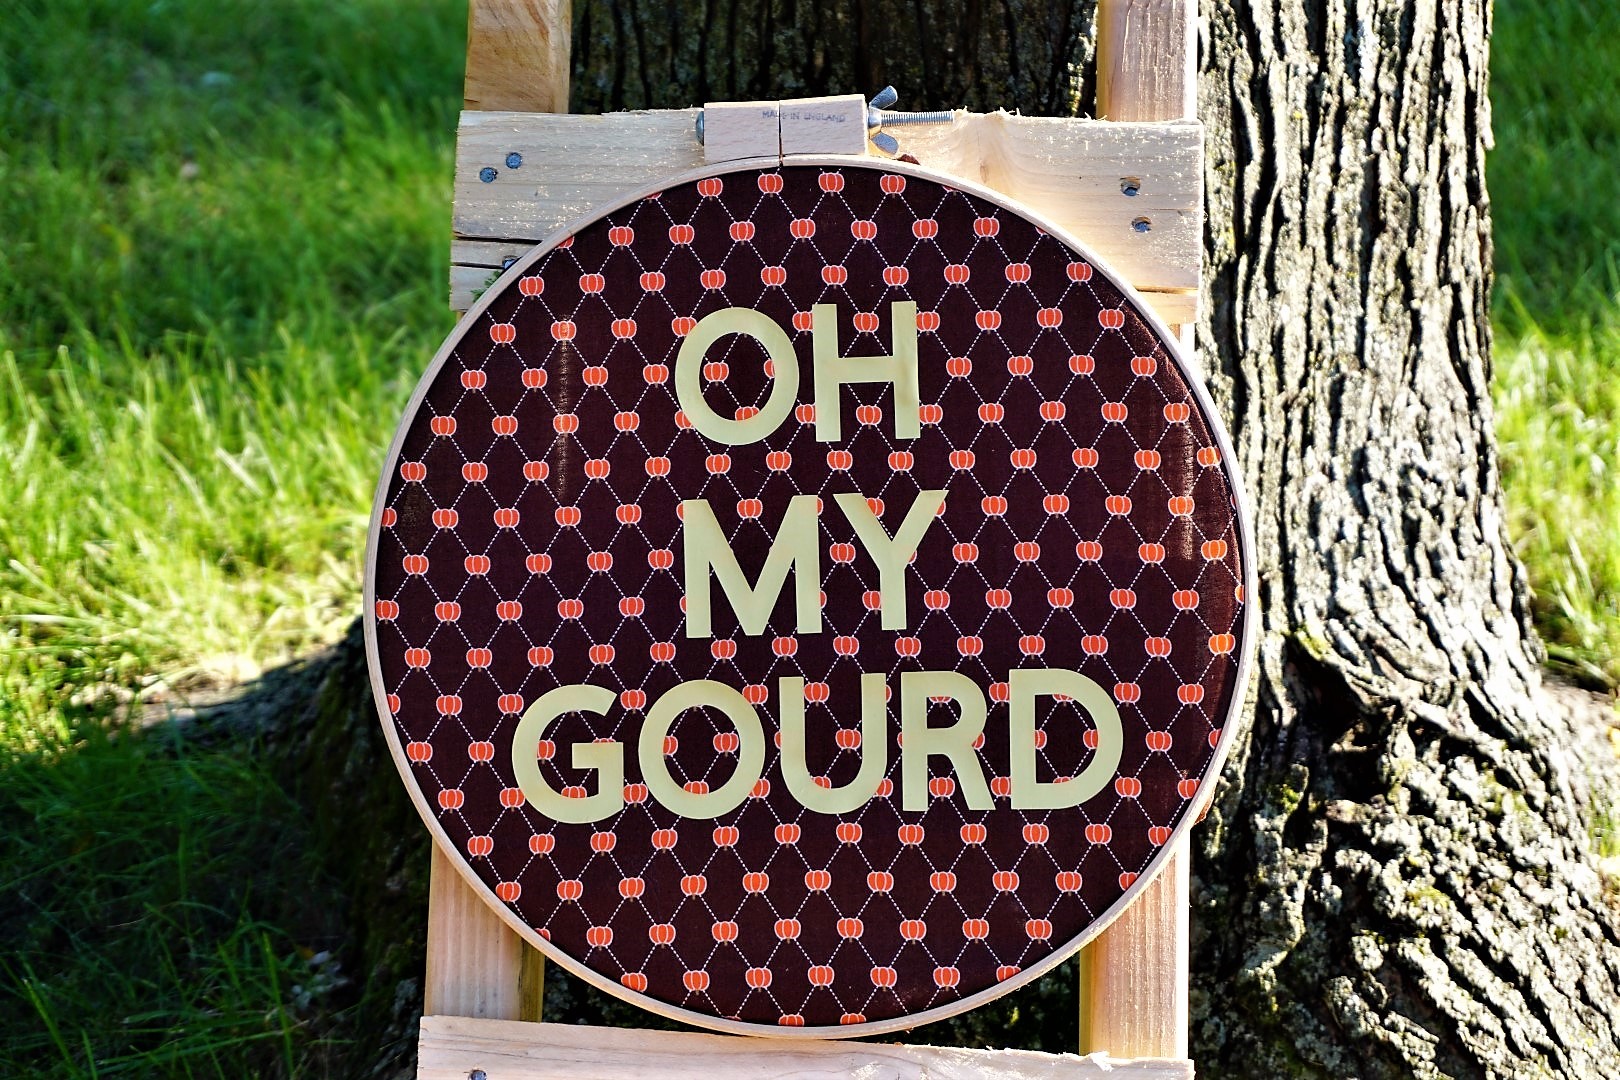  Circuit ion-on and embroidery hoop make for great fall party decor. Click here to re-create this fun fall party! | Legally Crafty #fallparty #bonfire #girlsnightin #girlsnight #basicfallgirl 